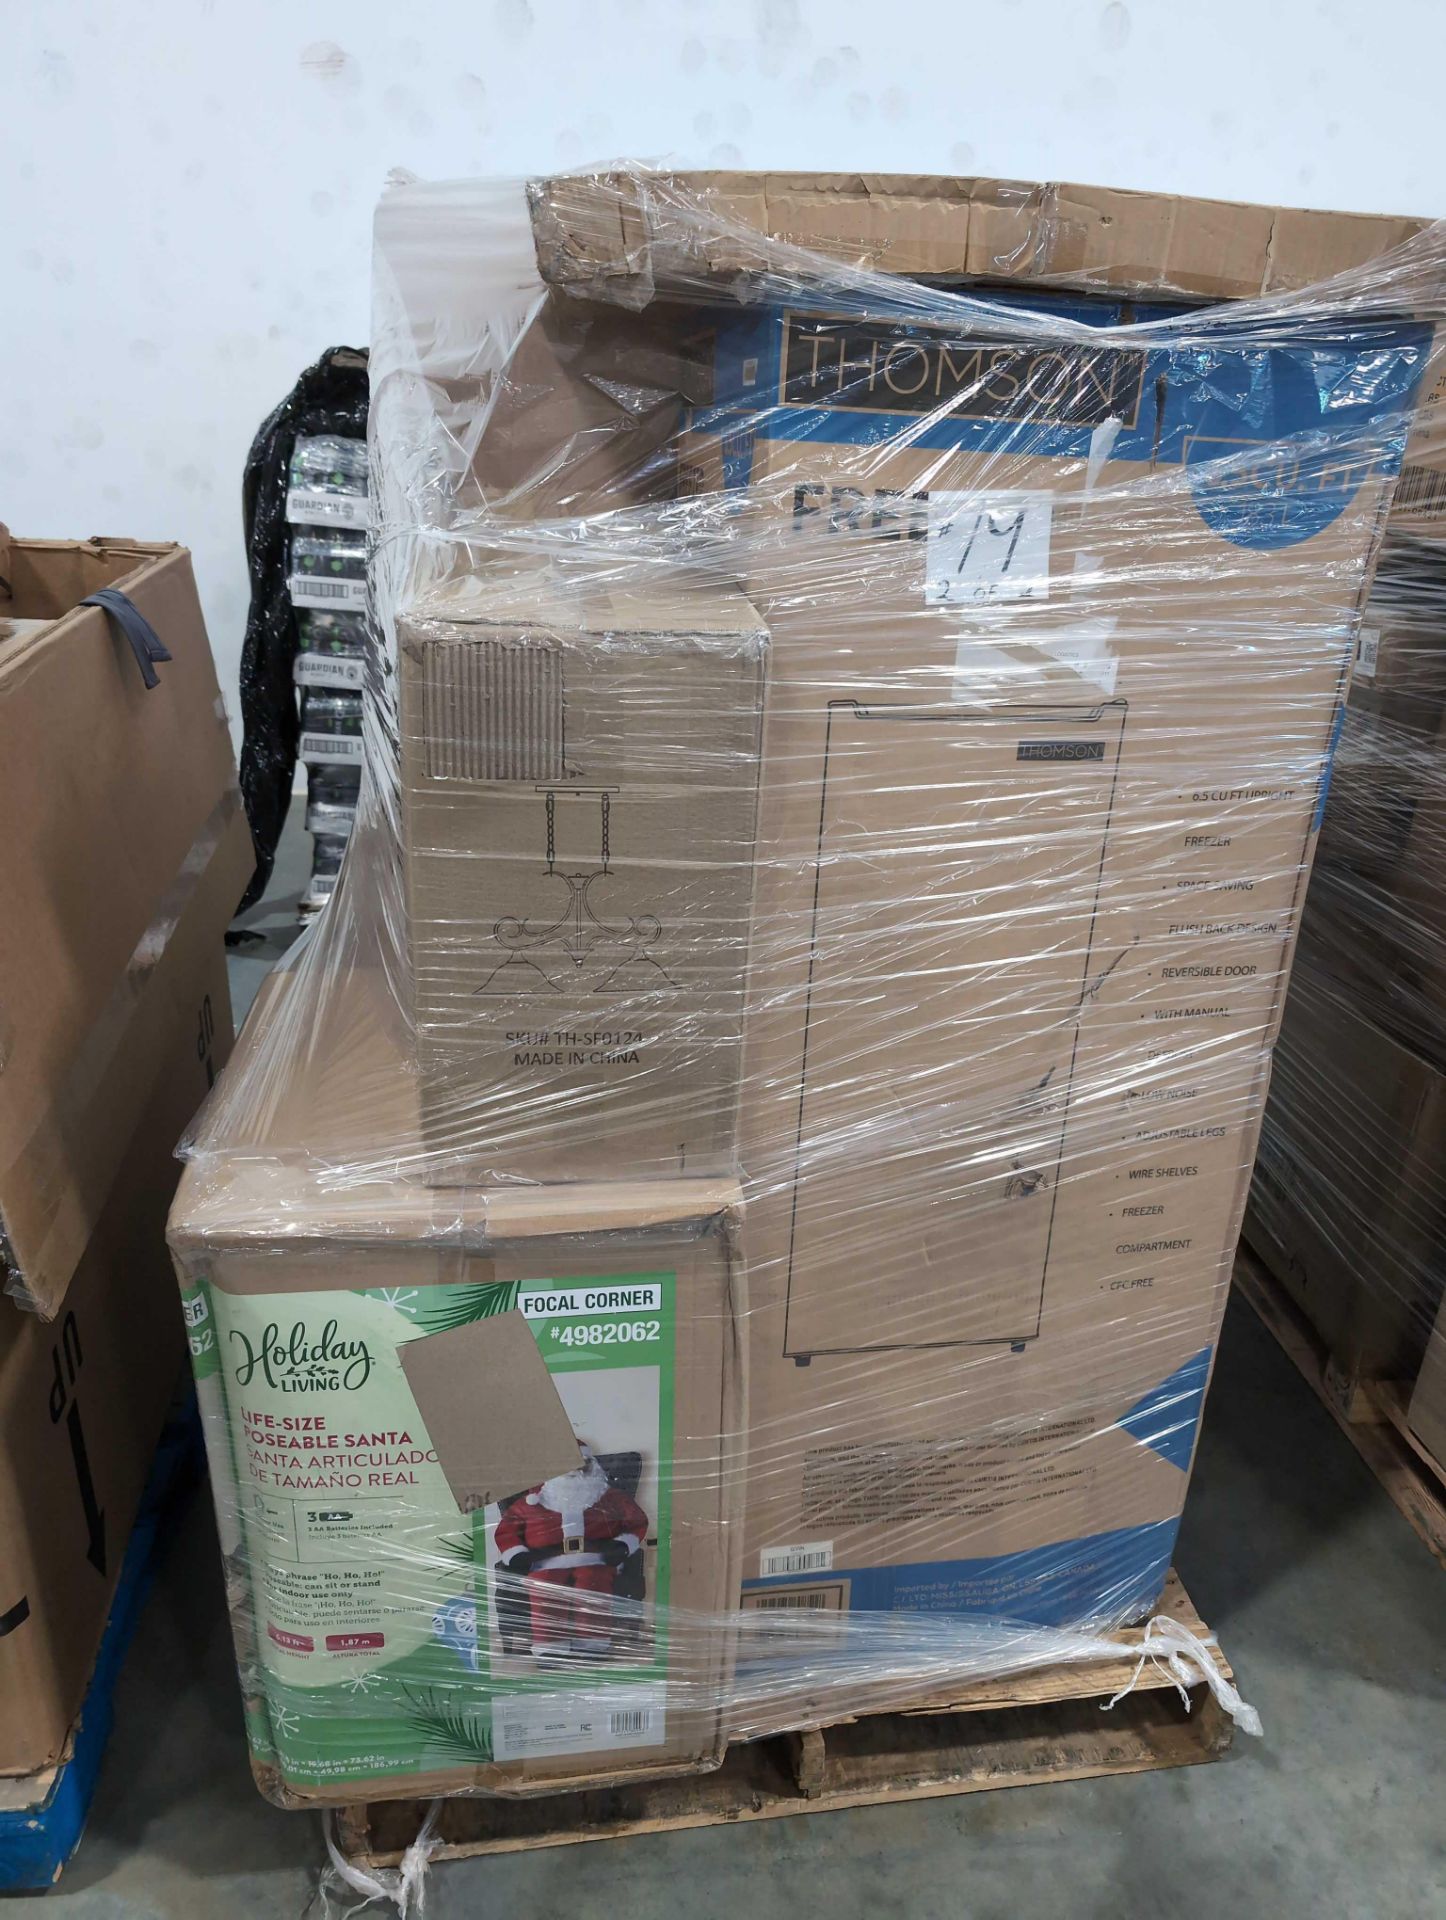 two pallets eight sleep holiday living HomeGoods Thompson fridge and more - Image 13 of 14